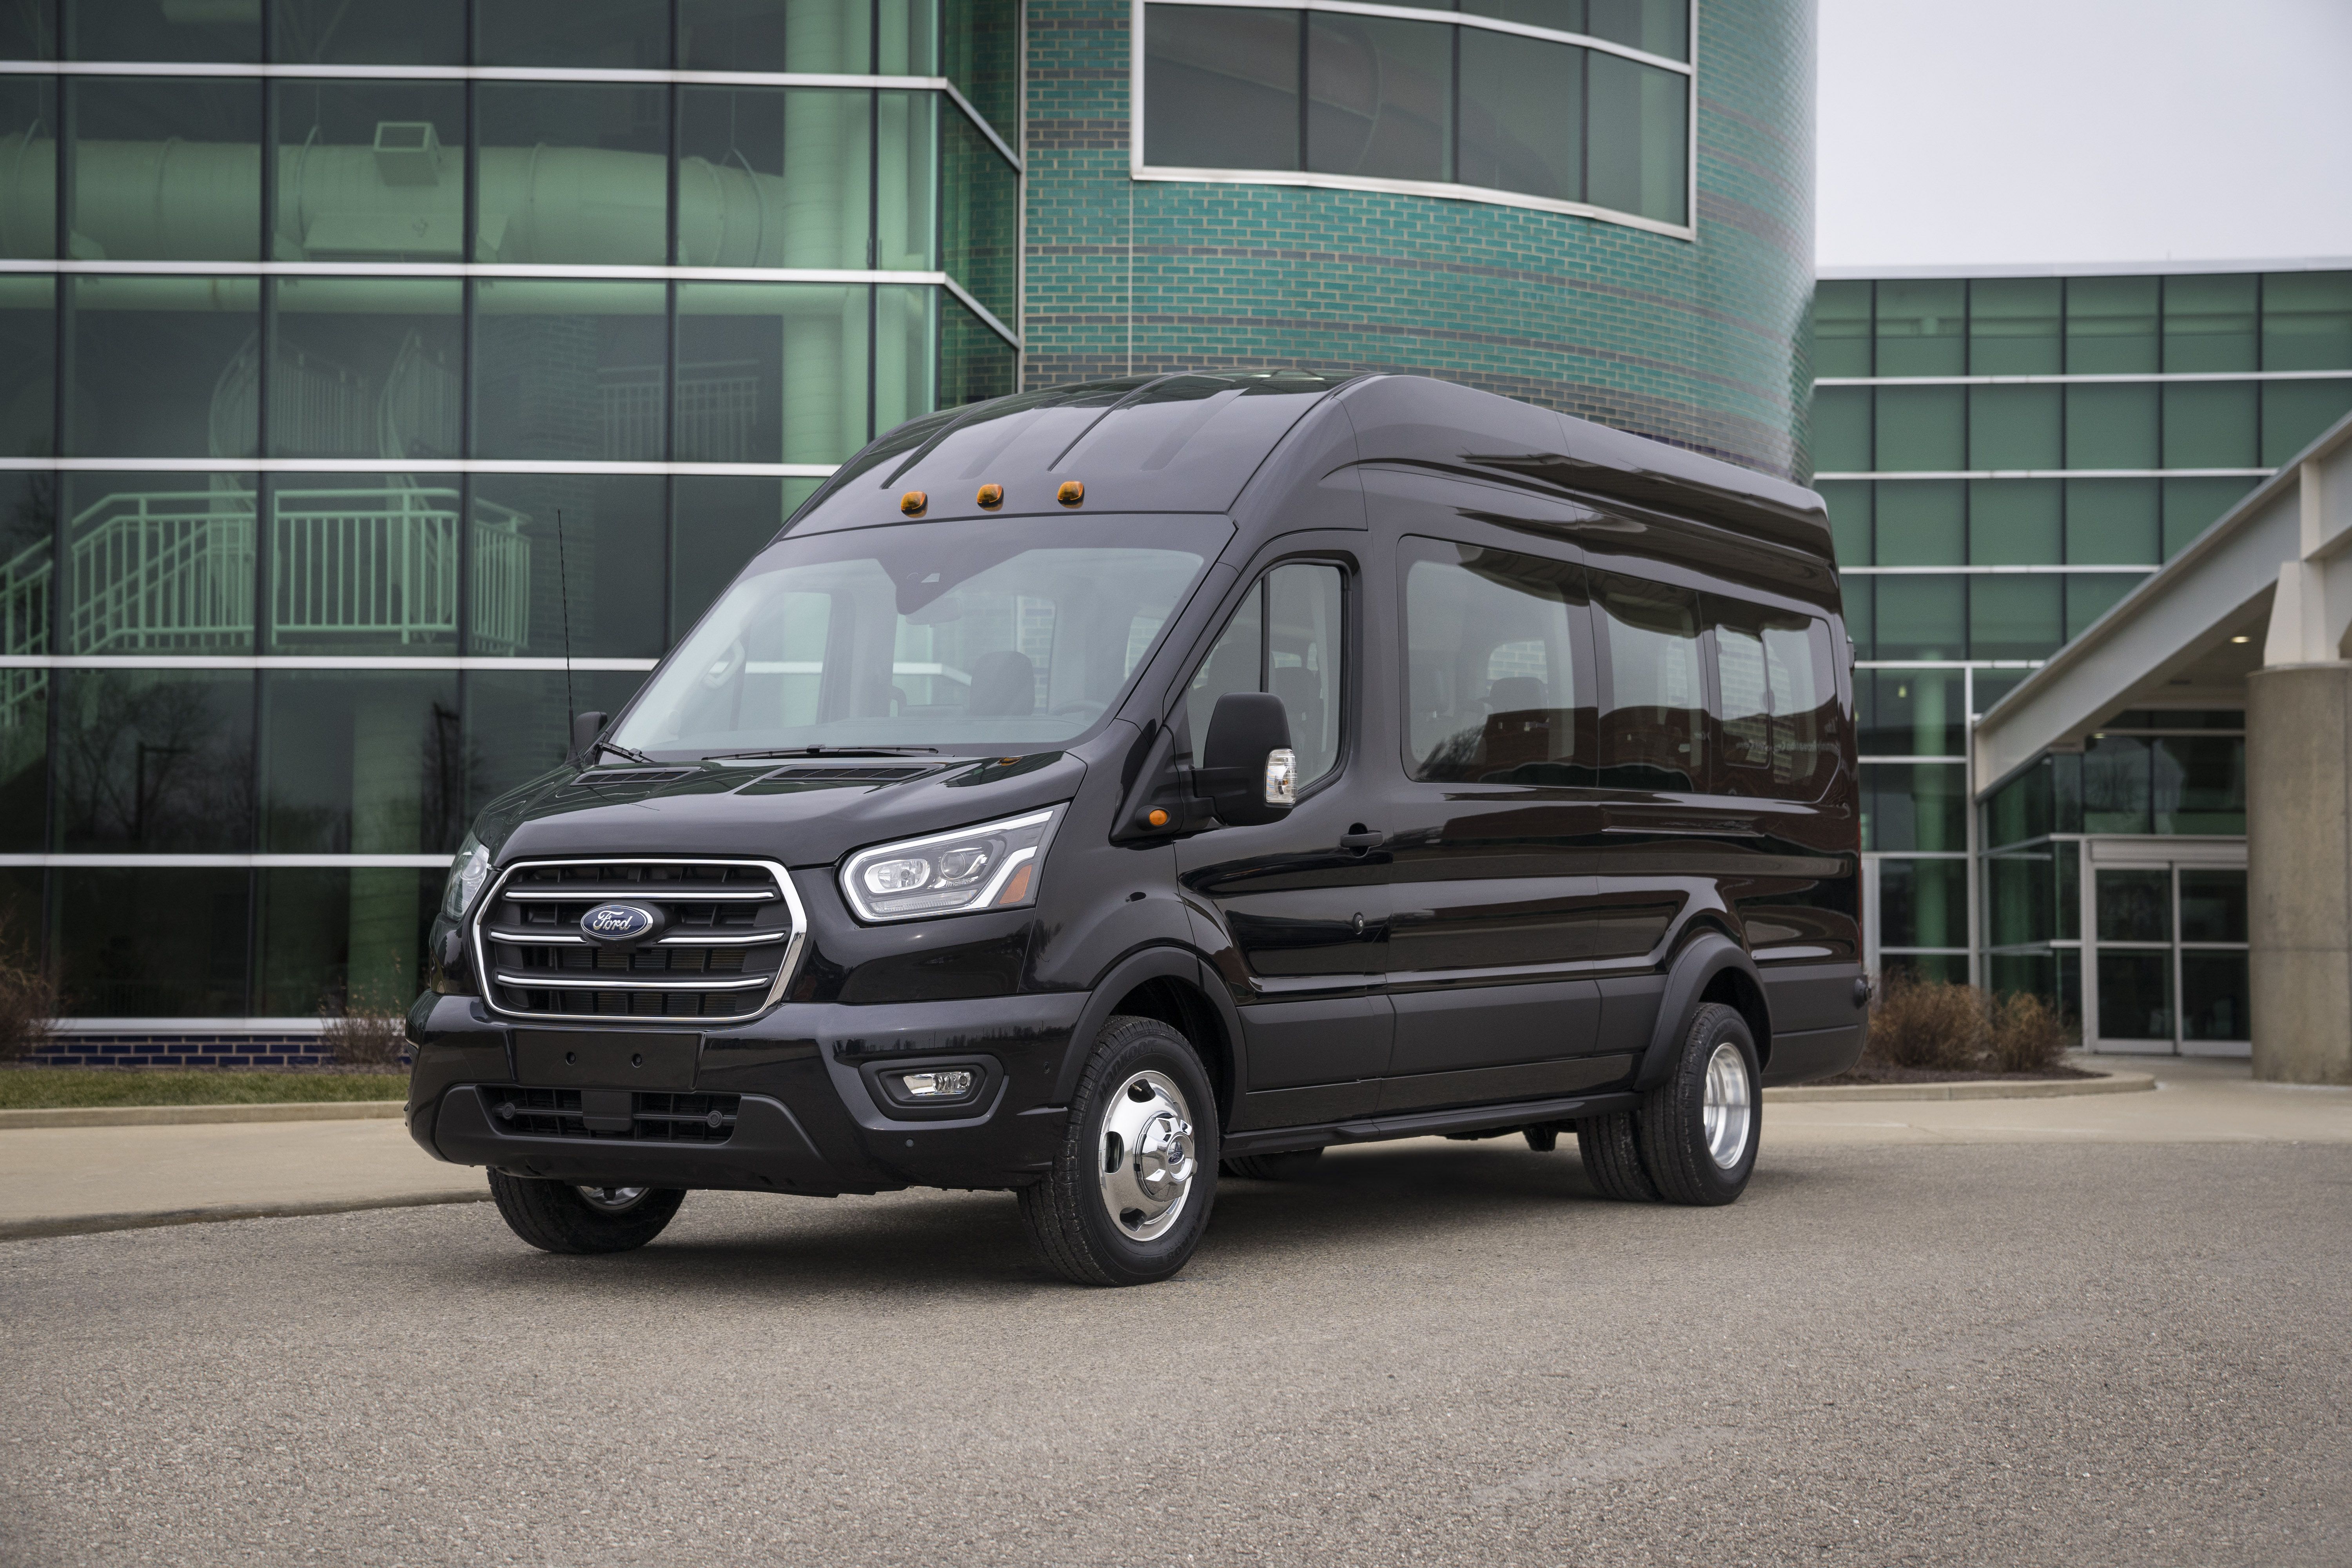 criticus Emuleren Geven 2020 Ford Transit Review, Pricing, and Specs